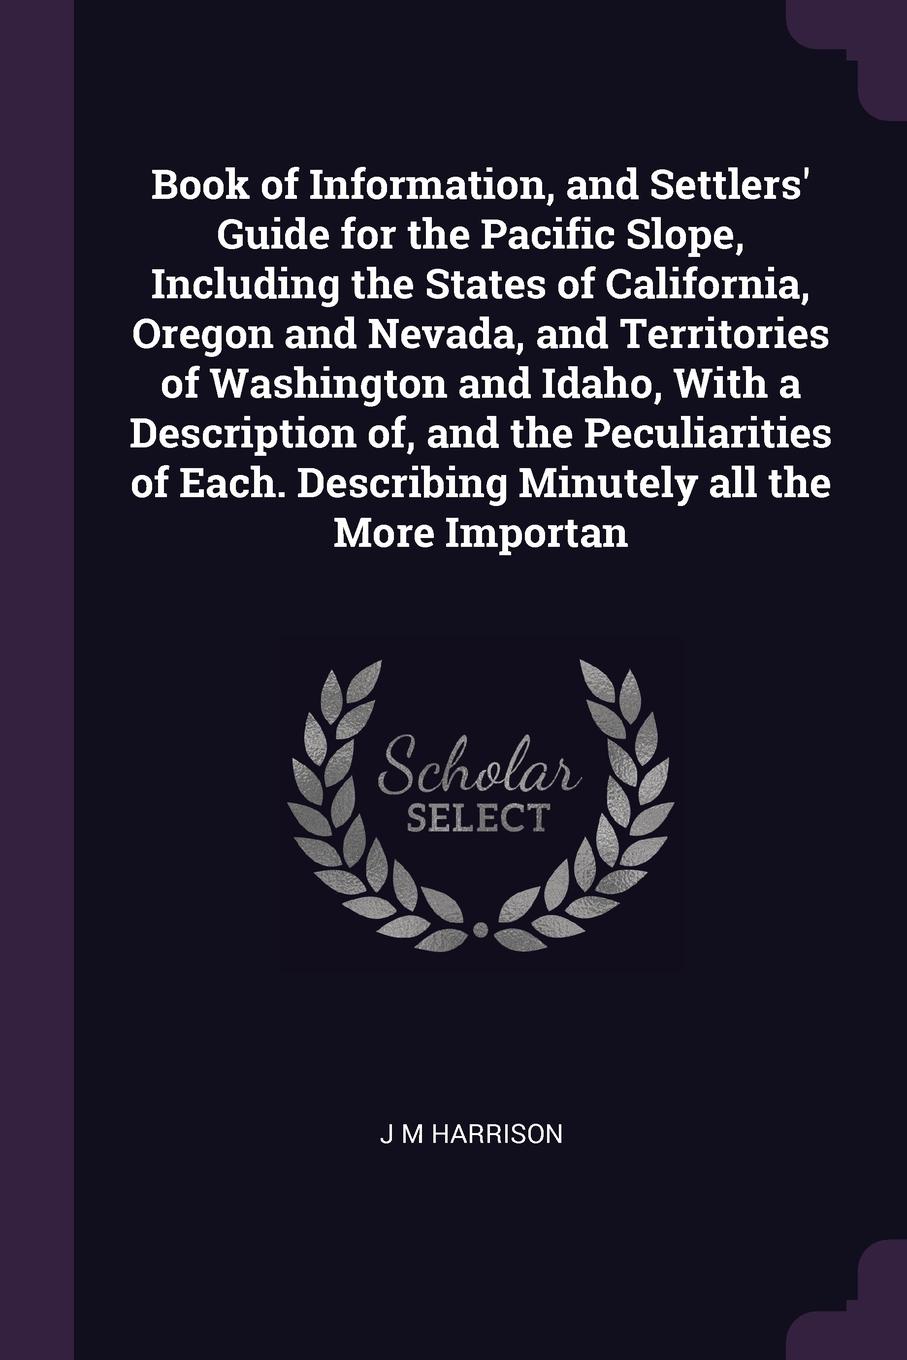 Book of Information, and Settlers` Guide for the Pacific Slope, Including the States of California, Oregon and Nevada, and Territories of Washington and Idaho, With a Description of, and the Peculiarities of Each. Describing Minutely all the More ...